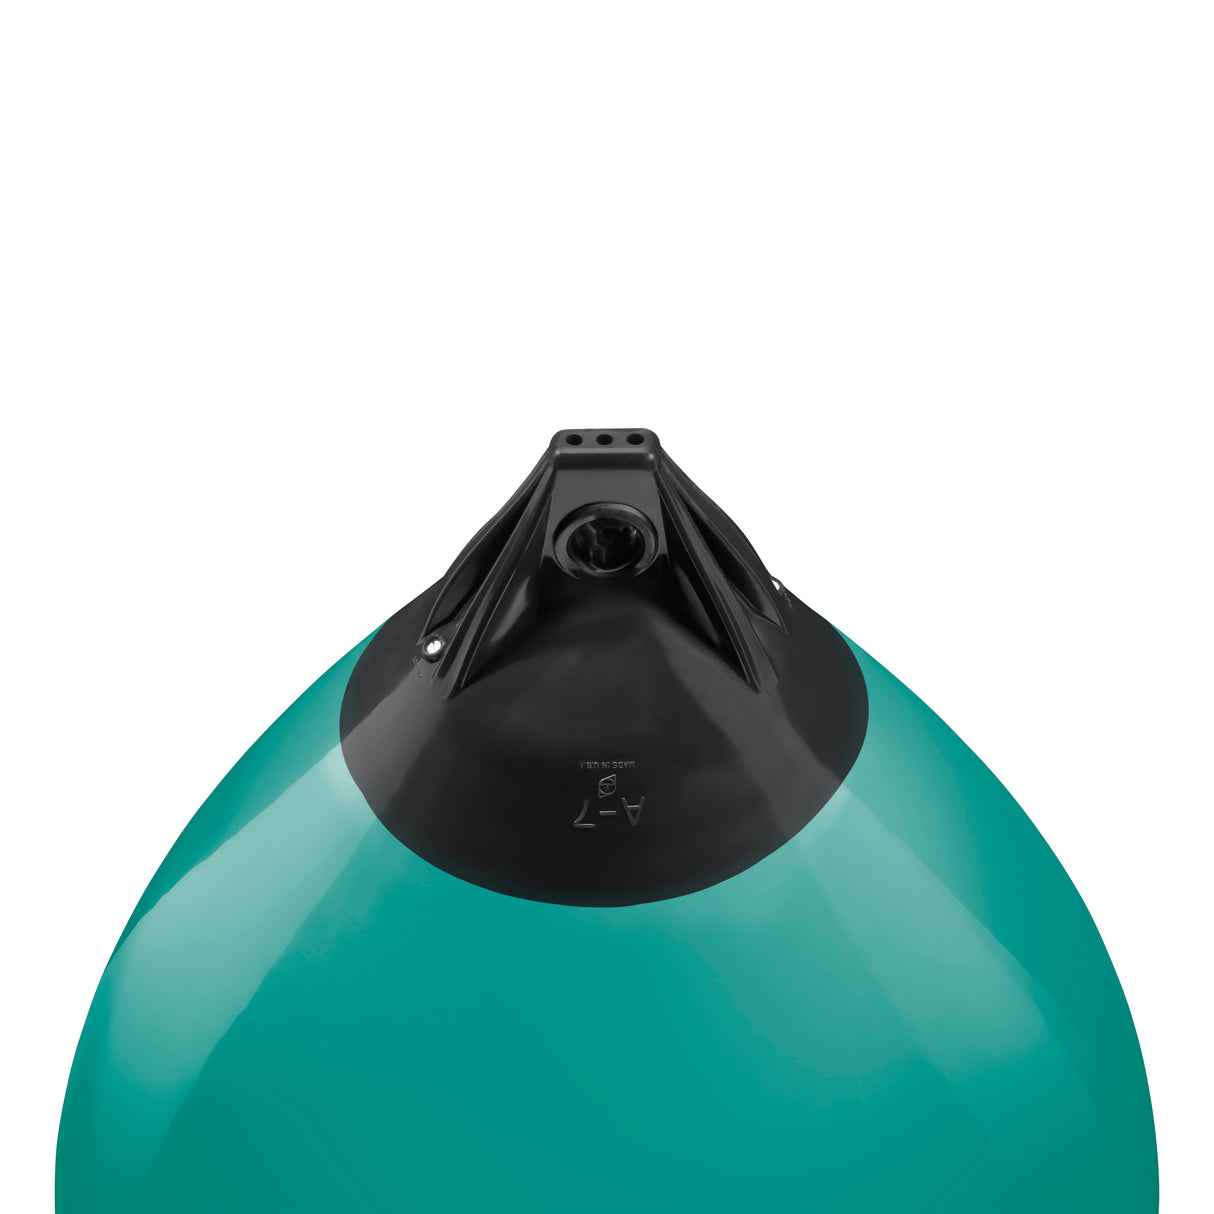 Teal buoy with Black-Top, Polyform A-7 angled shot